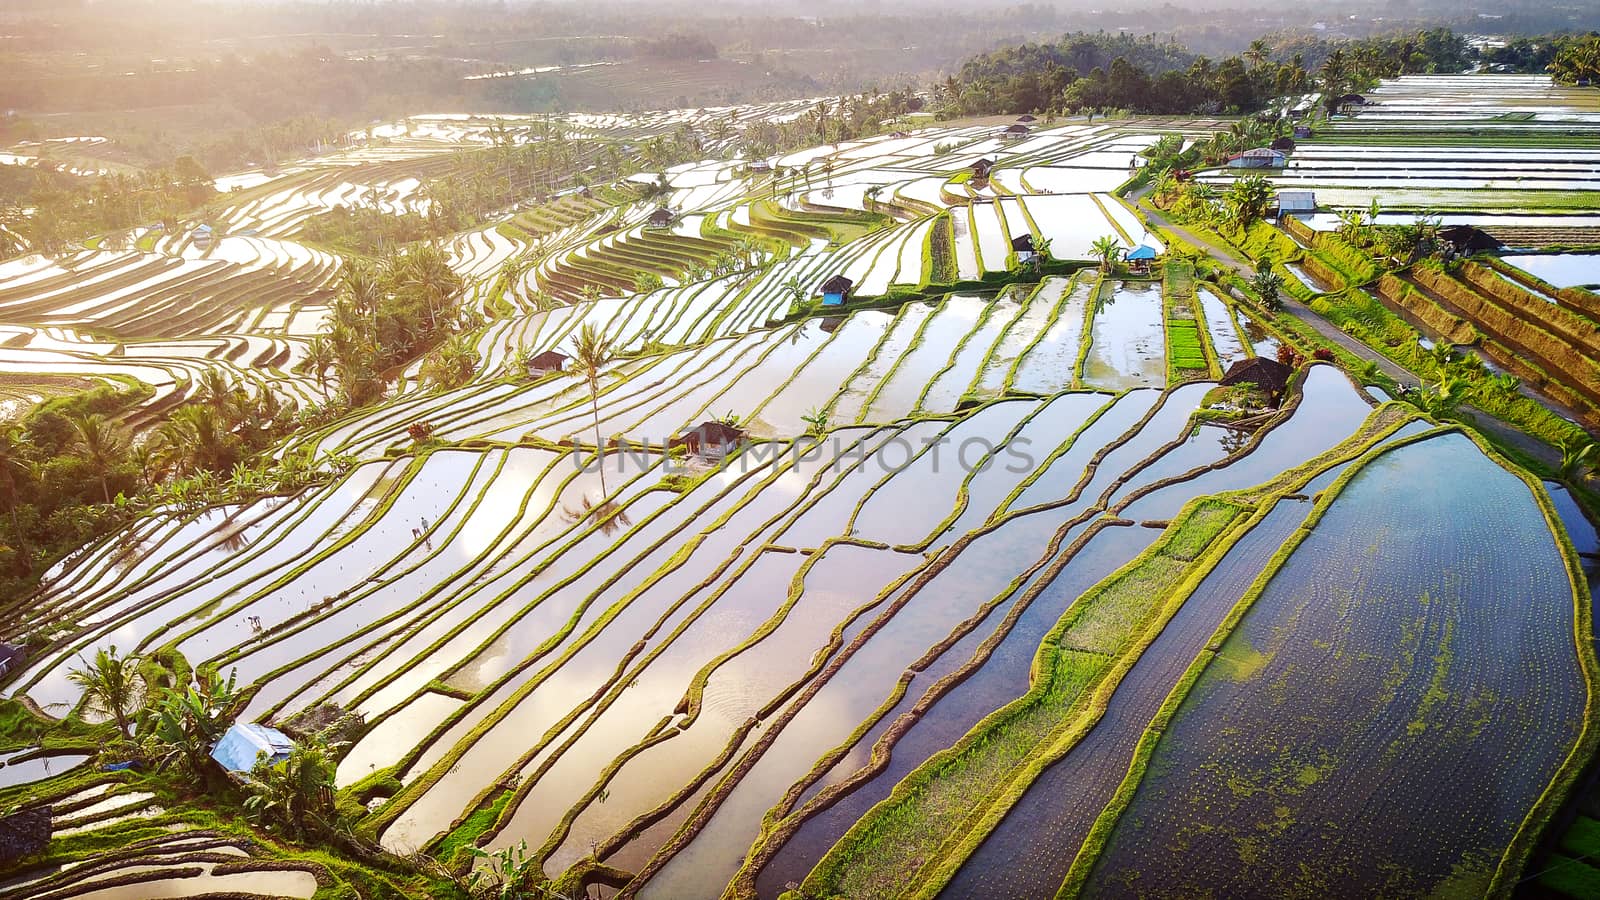 Aerial view of Bali Rice Terraces. The beautiful and dramatic rice fields of Jatiluwih in southeast Bali have been designated the prestigious UNESCO world heritage site.